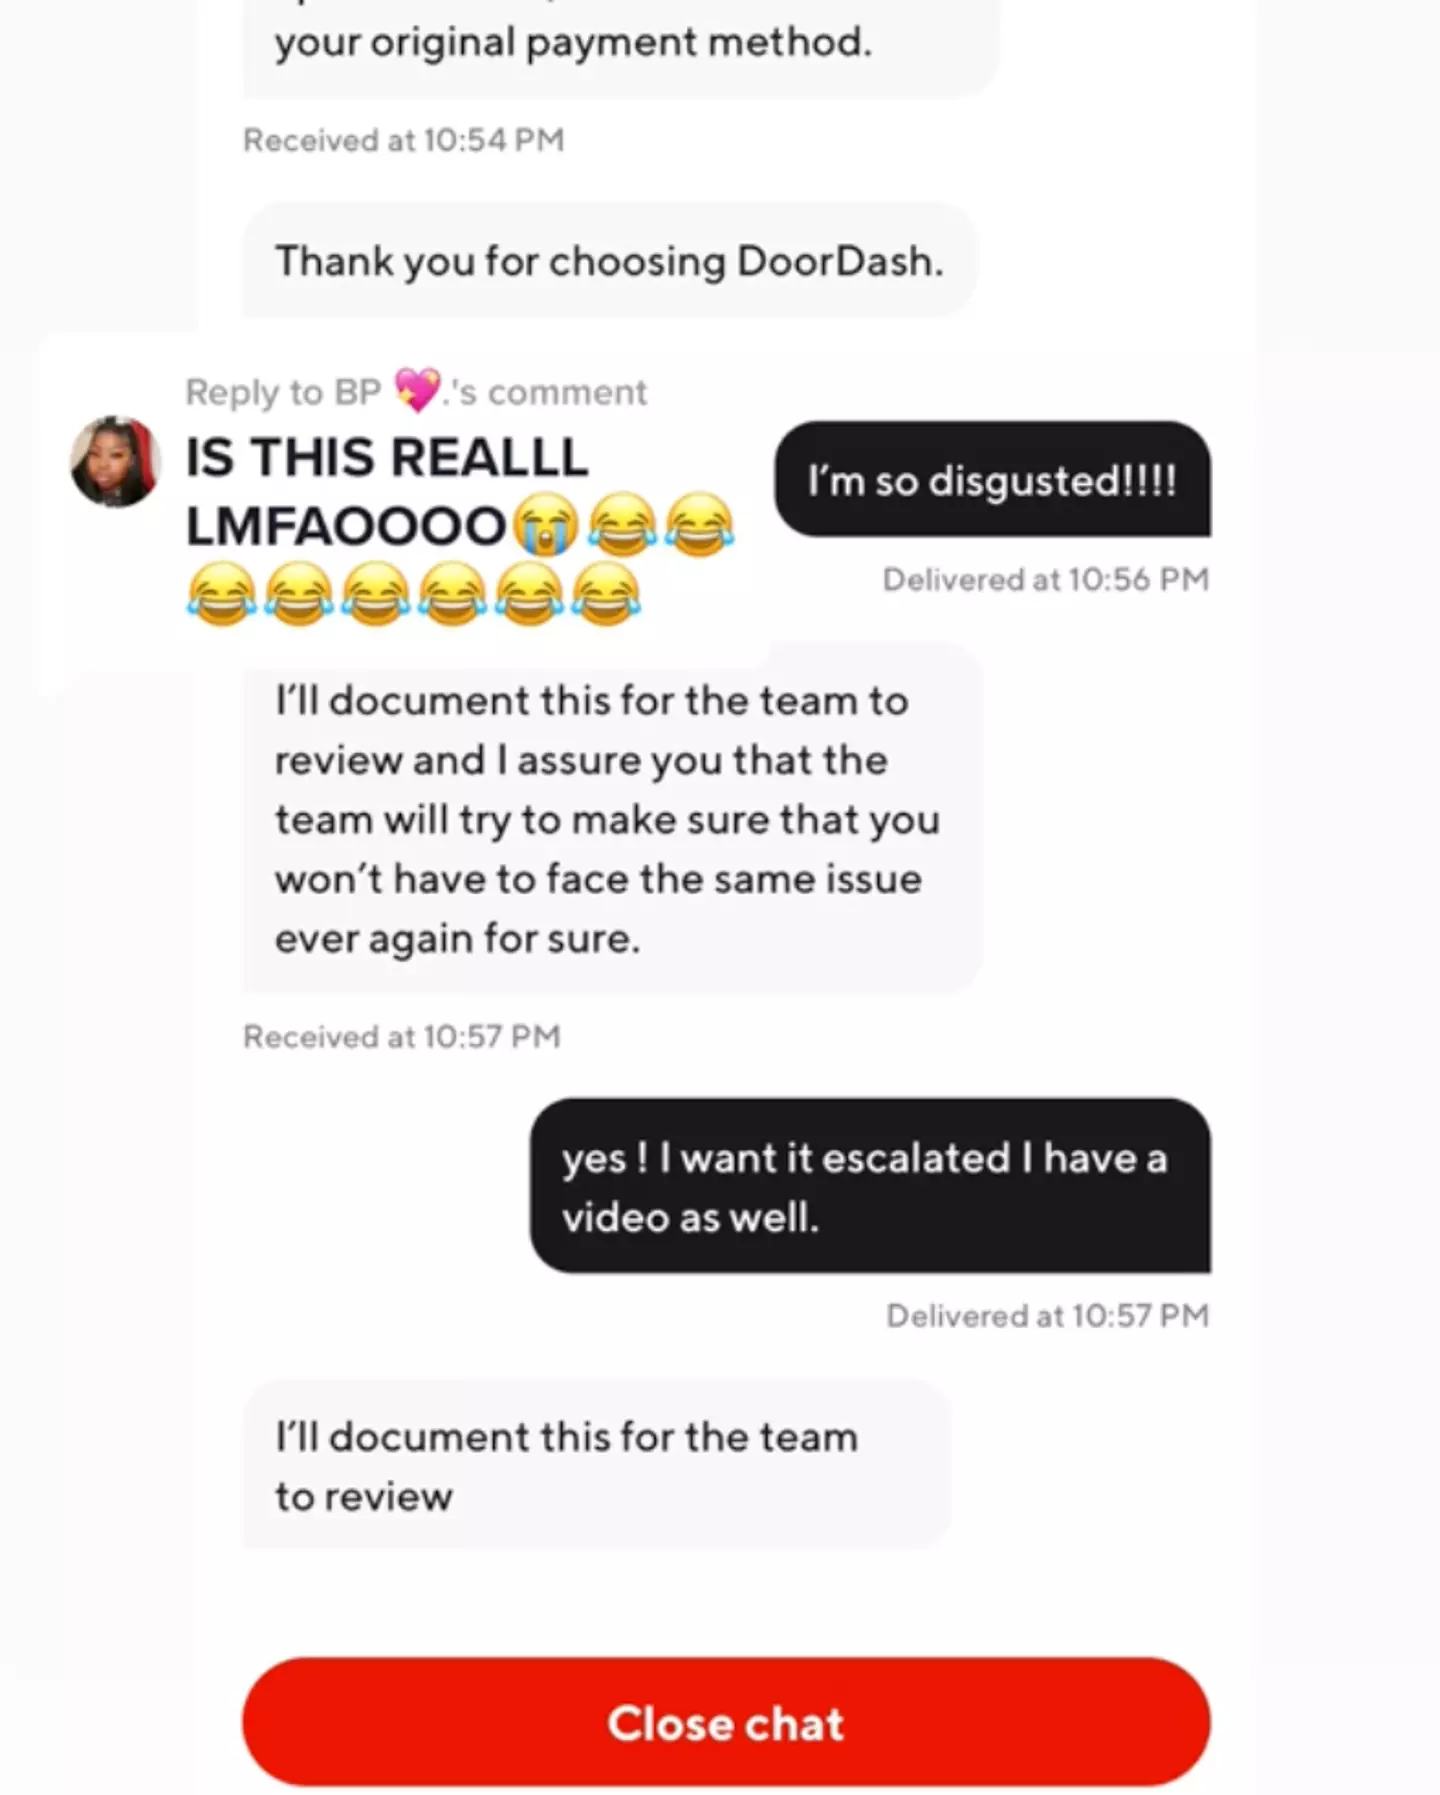 The TikToker showed the conversation she had with DoorDash and was able to get a refund.